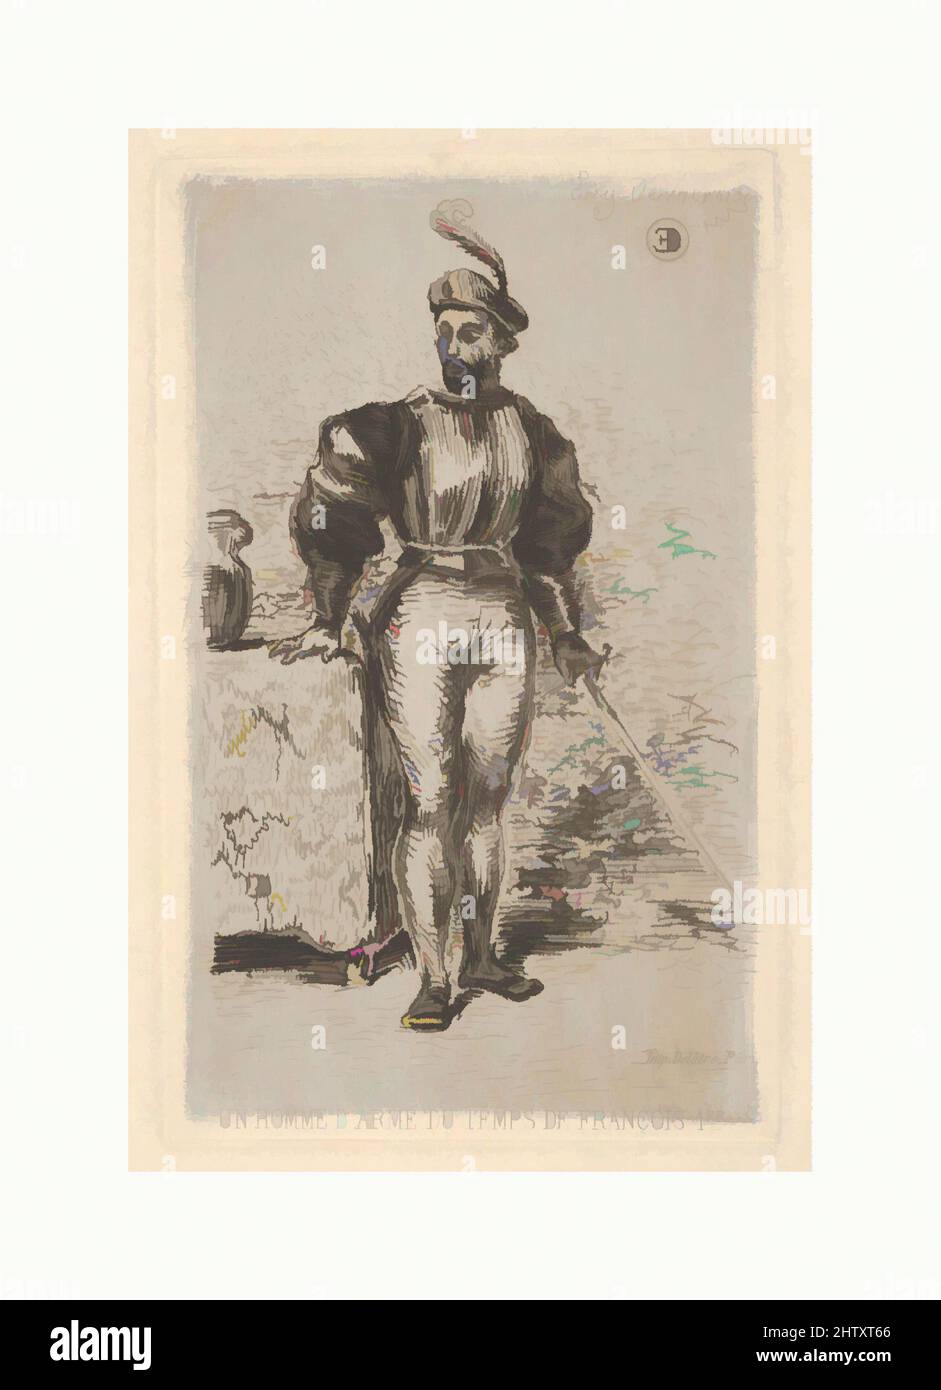 Art inspired by Man at Arms, 19th century, Etching and drypoint; second state, Sheet: 9 3/16 x 8 1/16 in. (23.4 x 20.5 cm), Prints, Eugène Delacroix (French, Charenton-Saint-Maurice 1798–1863 Paris, Classic works modernized by Artotop with a splash of modernity. Shapes, color and value, eye-catching visual impact on art. Emotions through freedom of artworks in a contemporary way. A timeless message pursuing a wildly creative new direction. Artists turning to the digital medium and creating the Artotop NFT Stock Photo